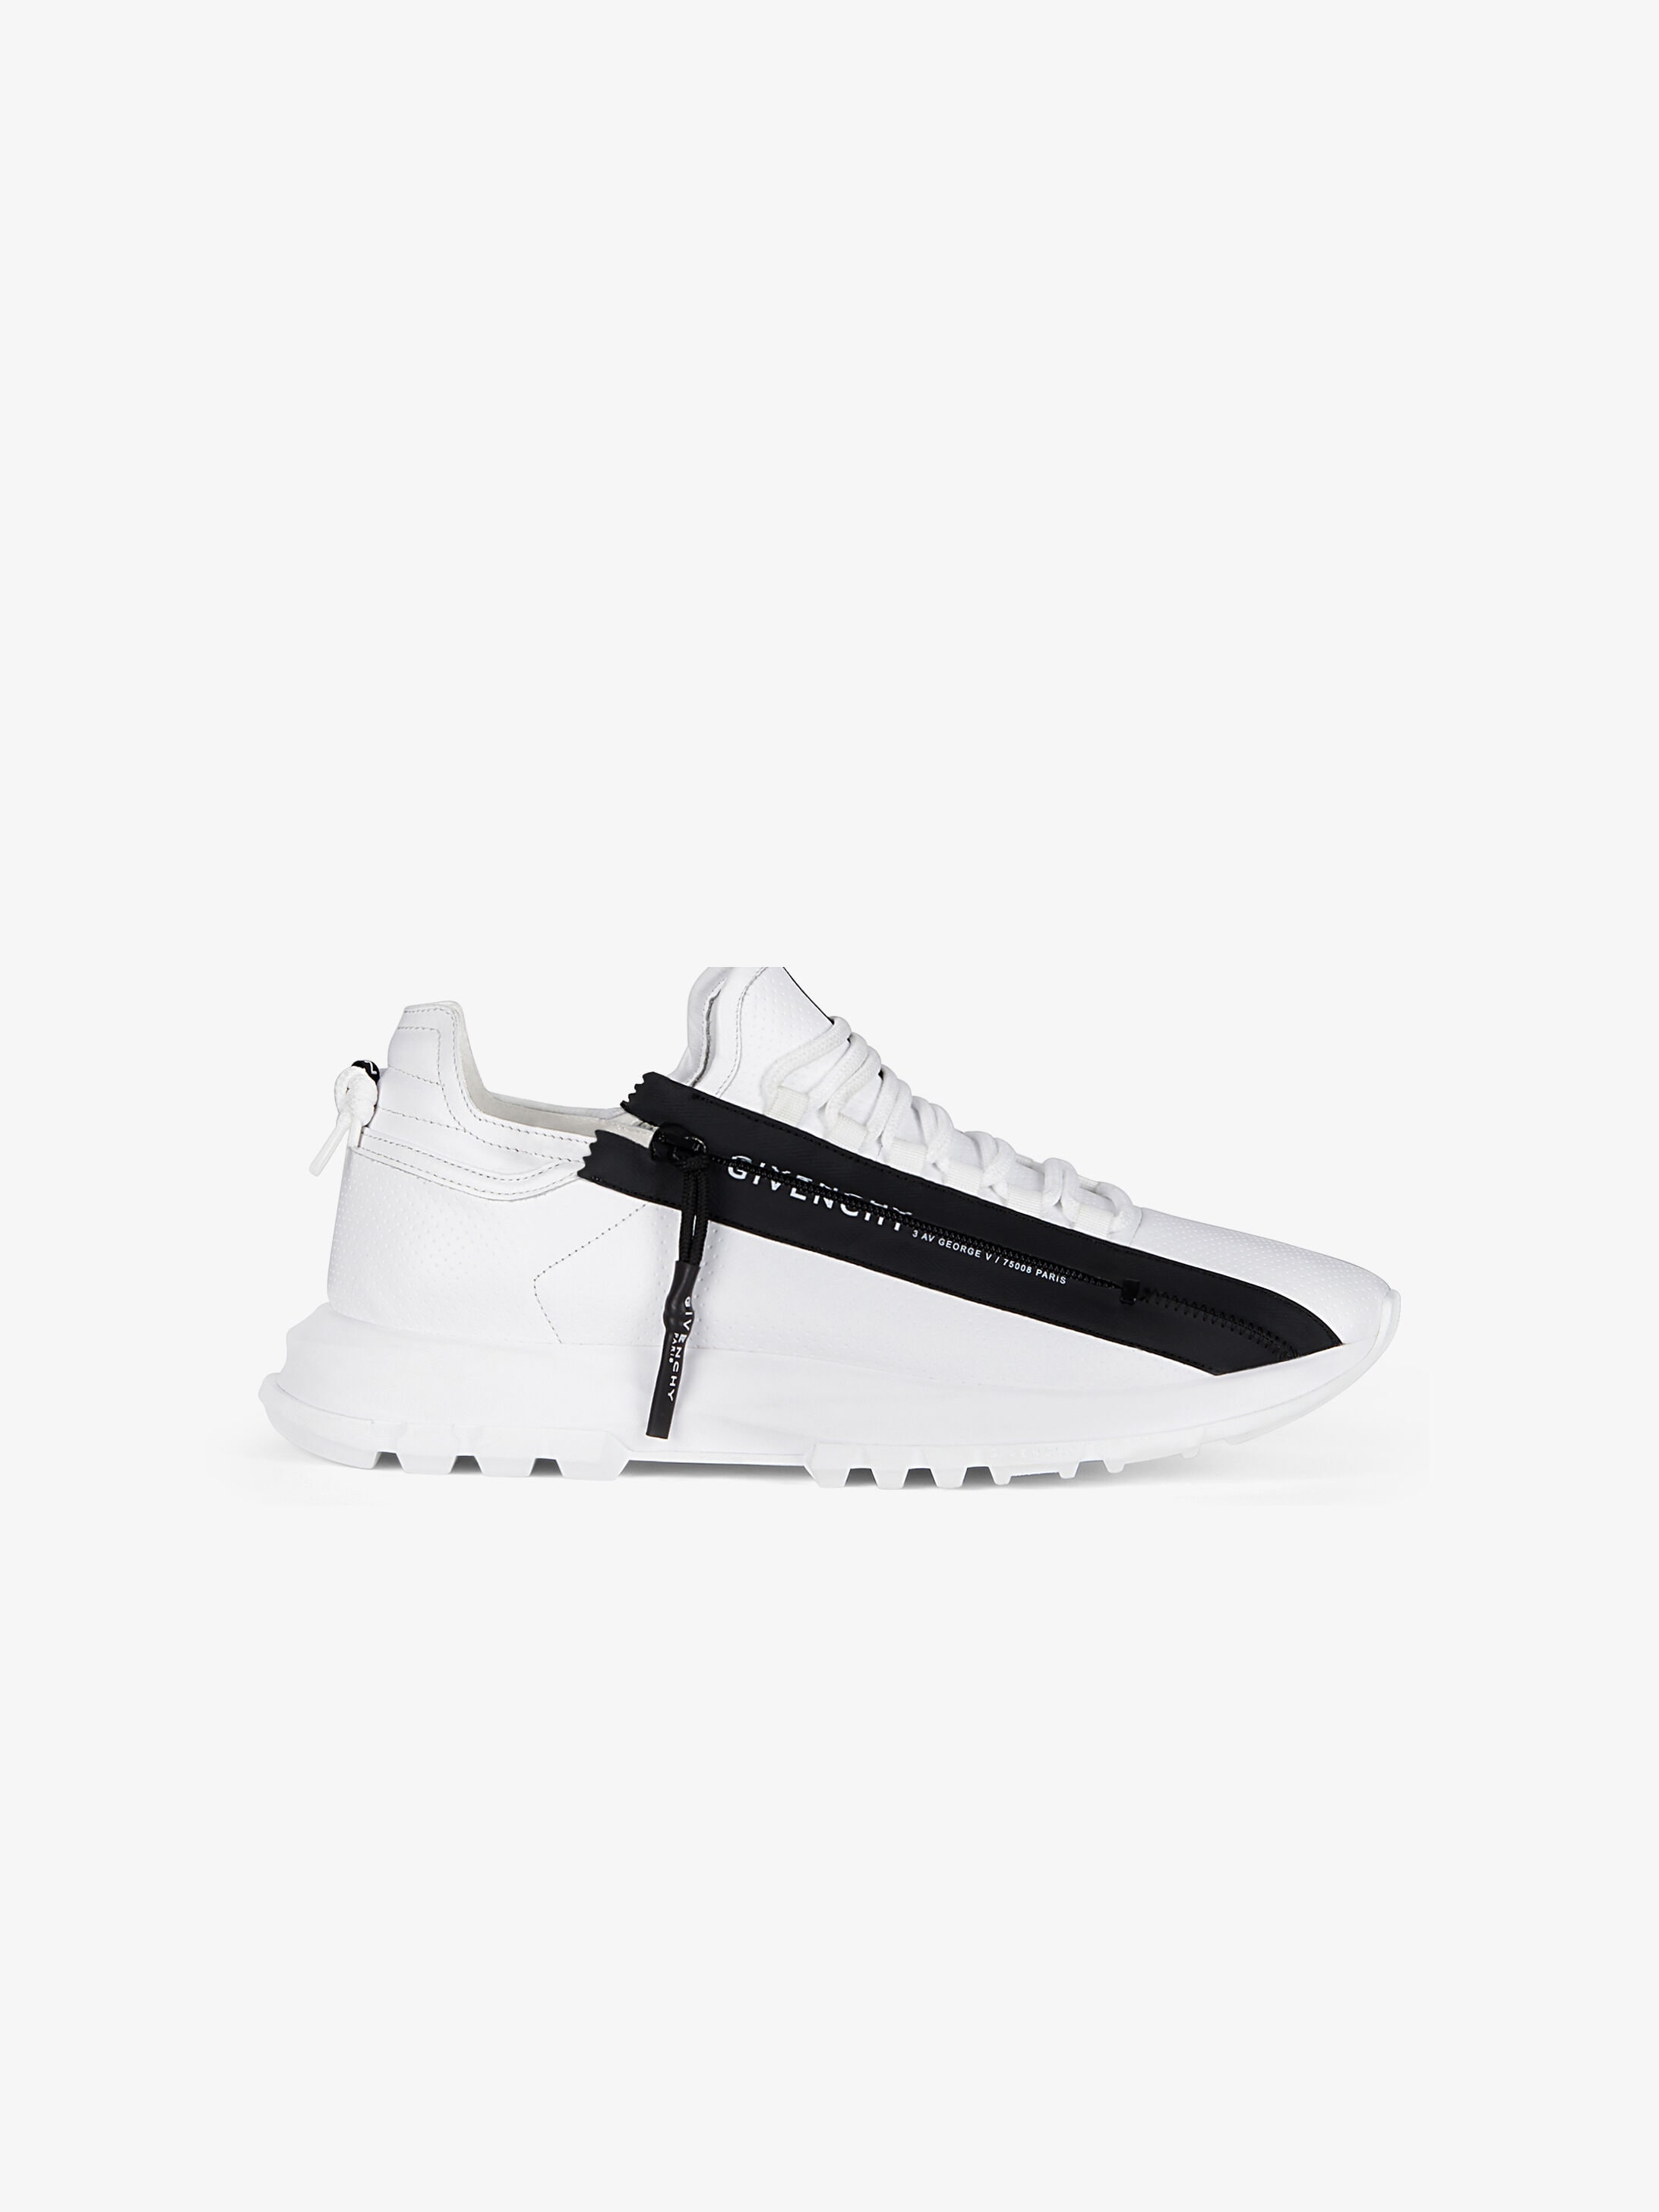 Men's Sneakers collection by Givenchy 